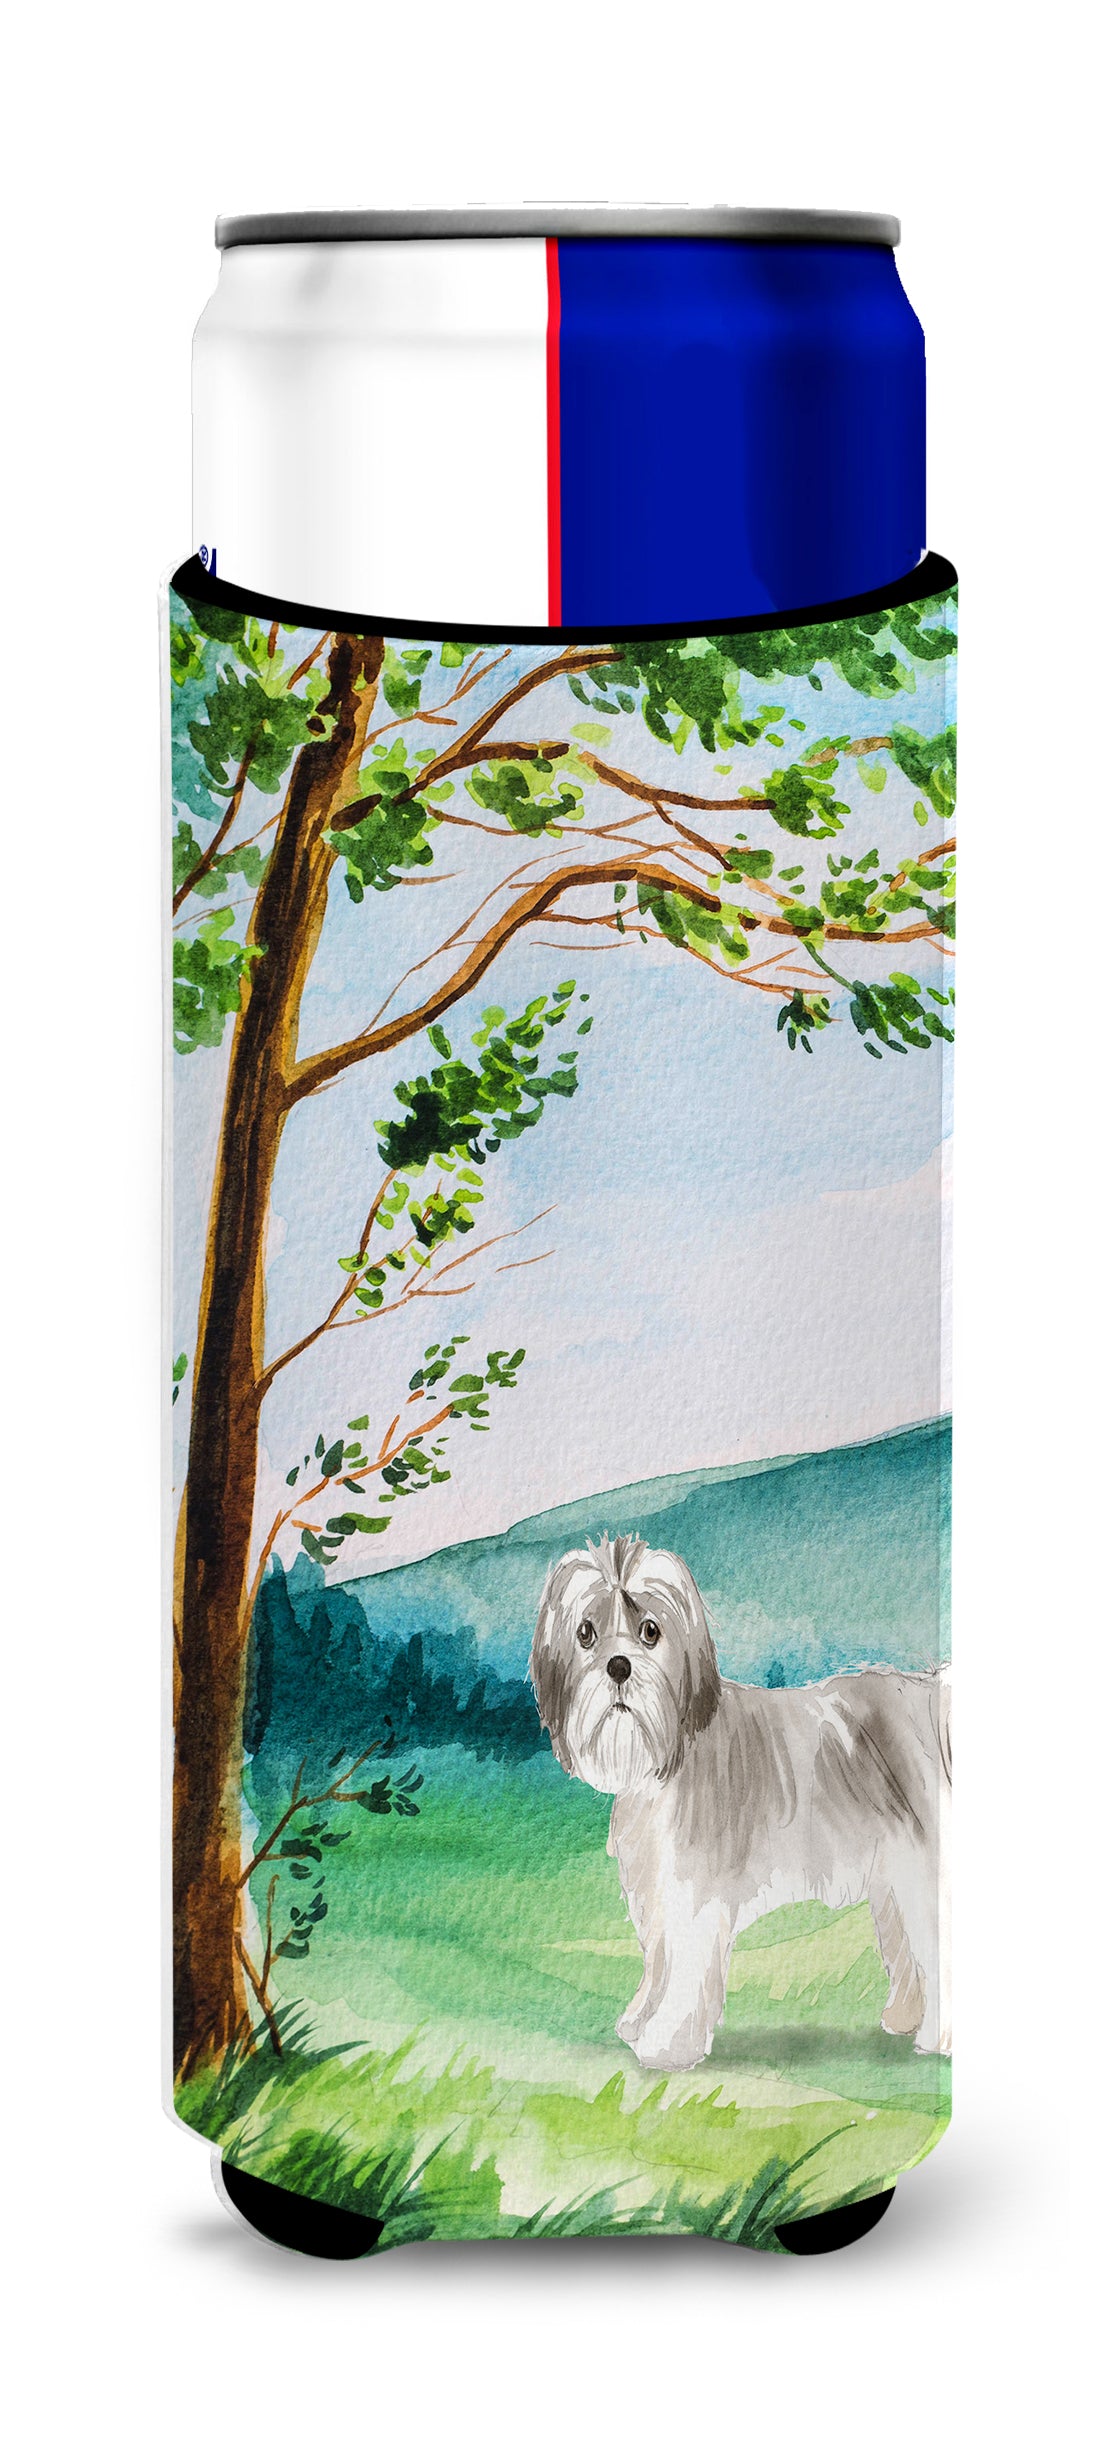 Under the Tree Shih Tzu Puppy  Ultra Hugger for slim cans CK2556MUK